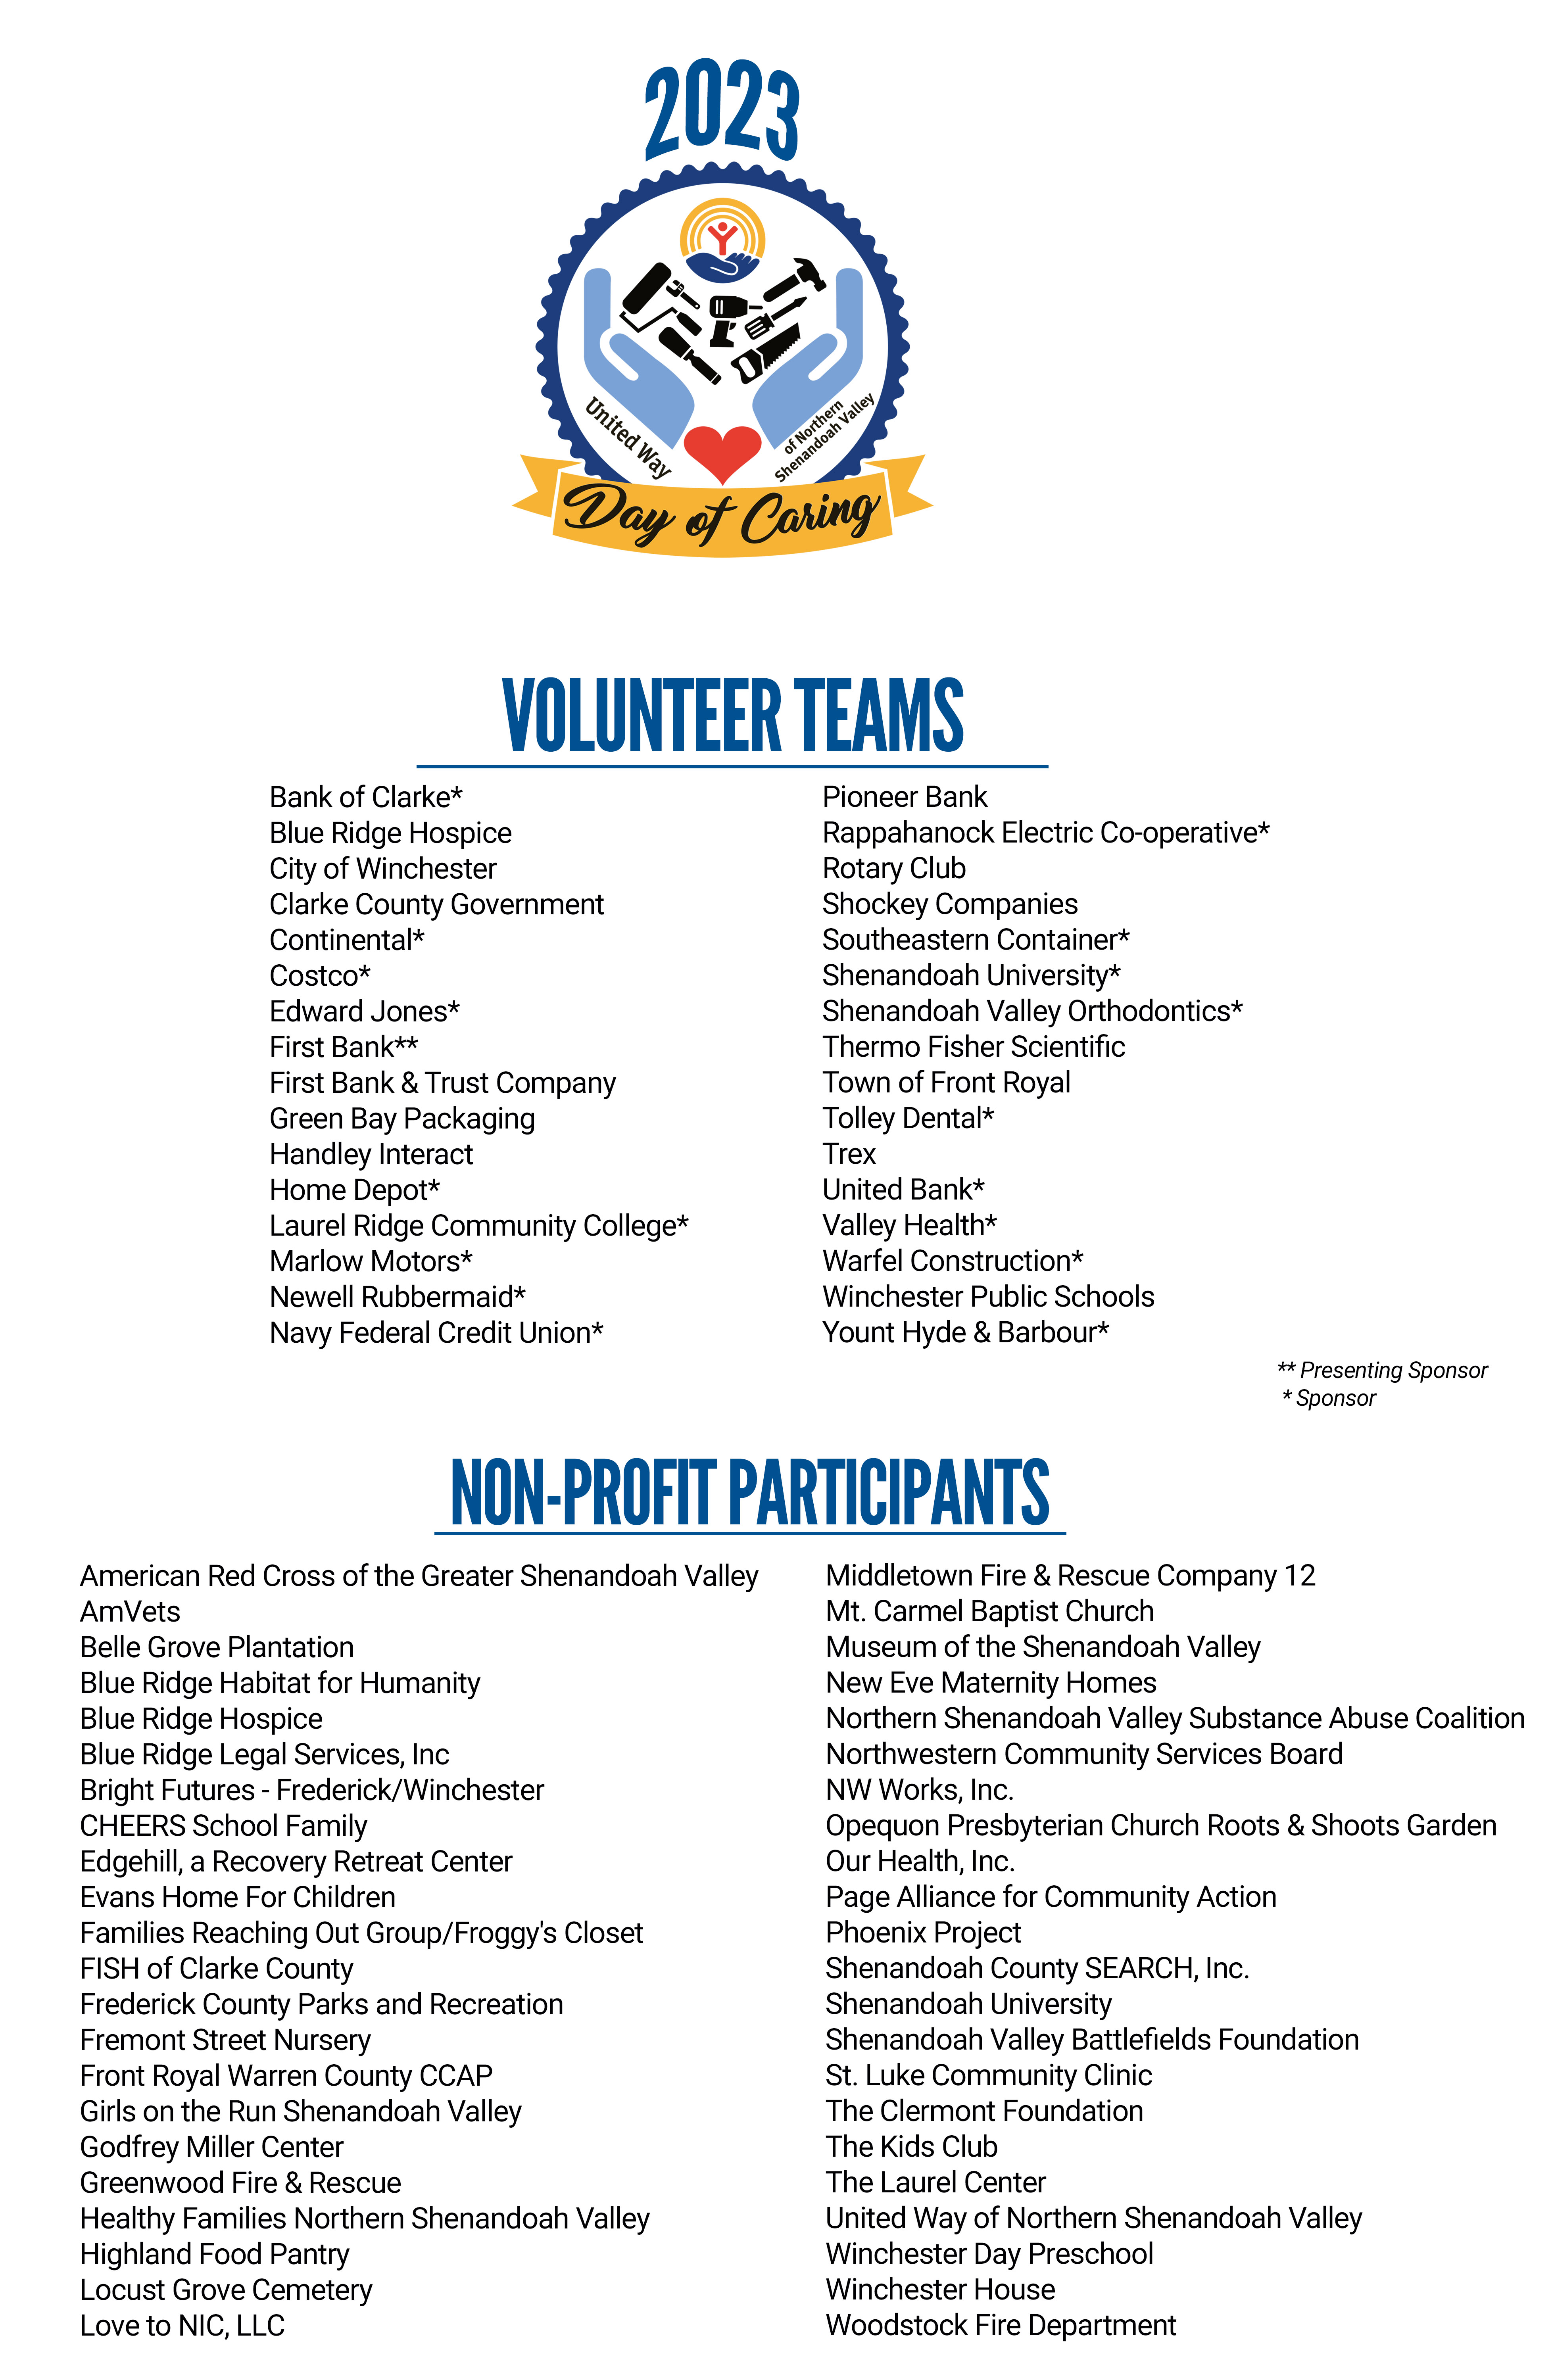 List of the teams and nonprofits in alphabetical order